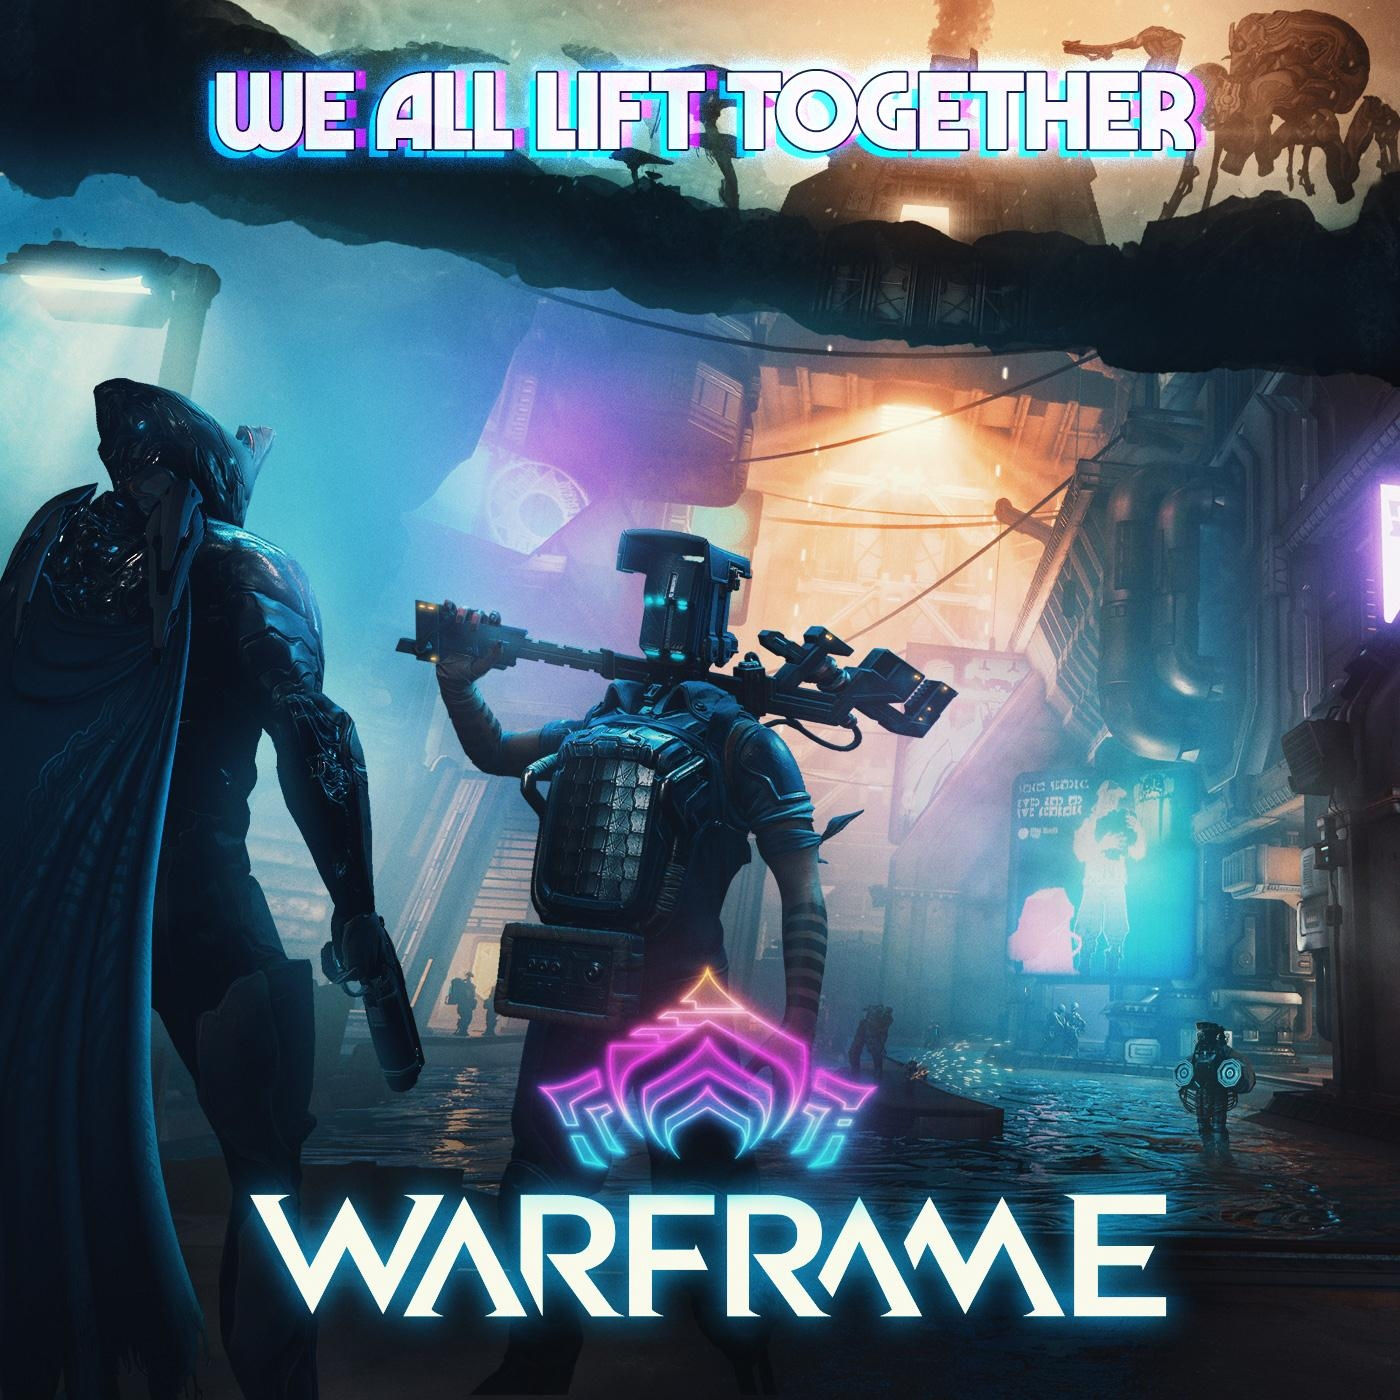 We all lift together from warframe перевод (120) фото